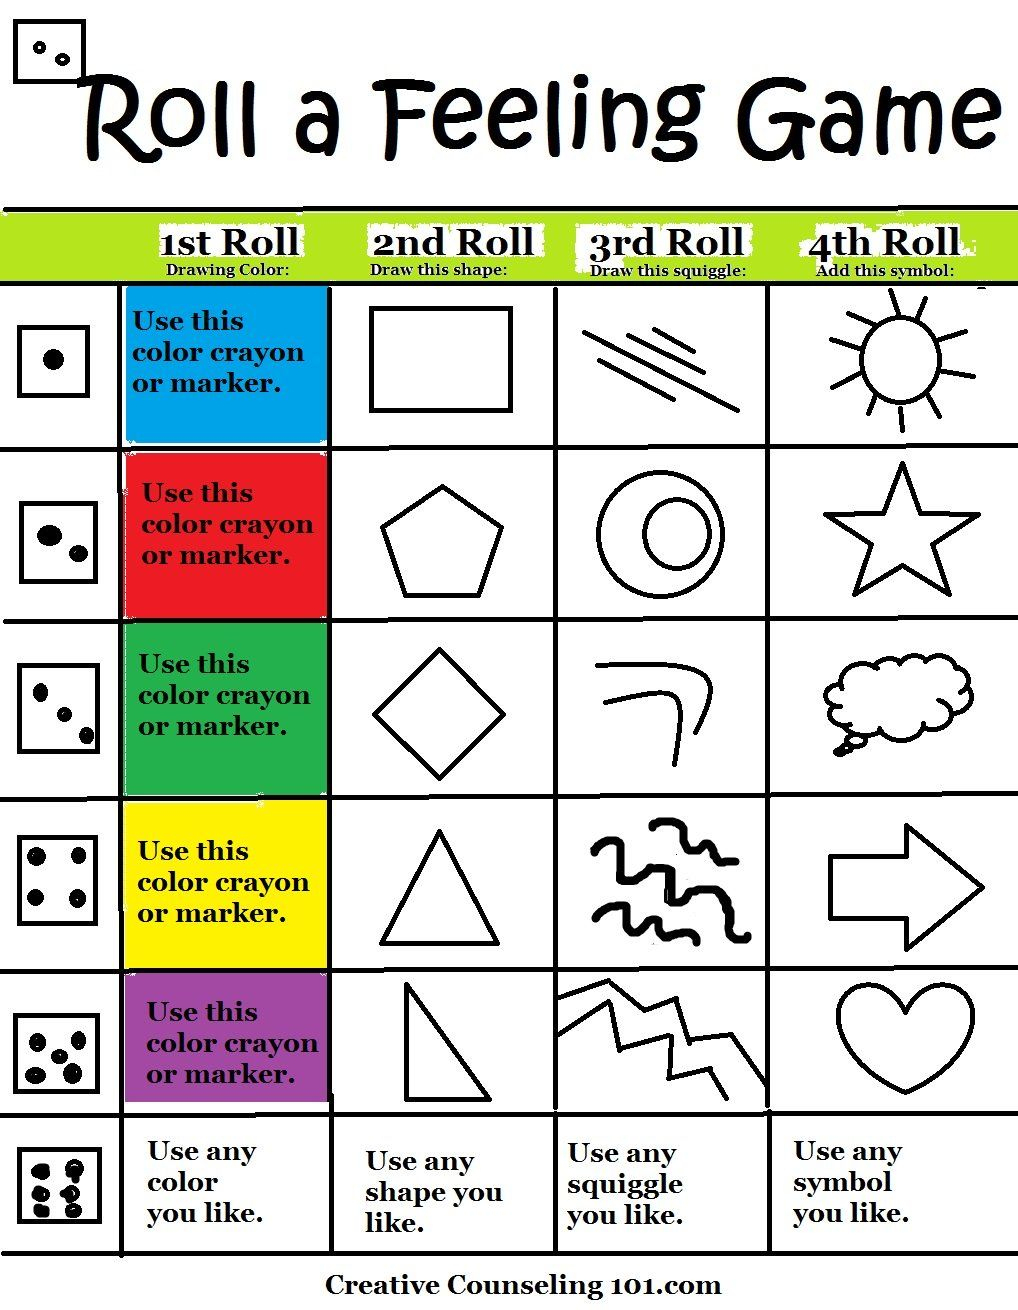 Art Therapy Roll-A-Feelings Game With Free Art Therapy Game Board - Printable Mind Puzzle Games